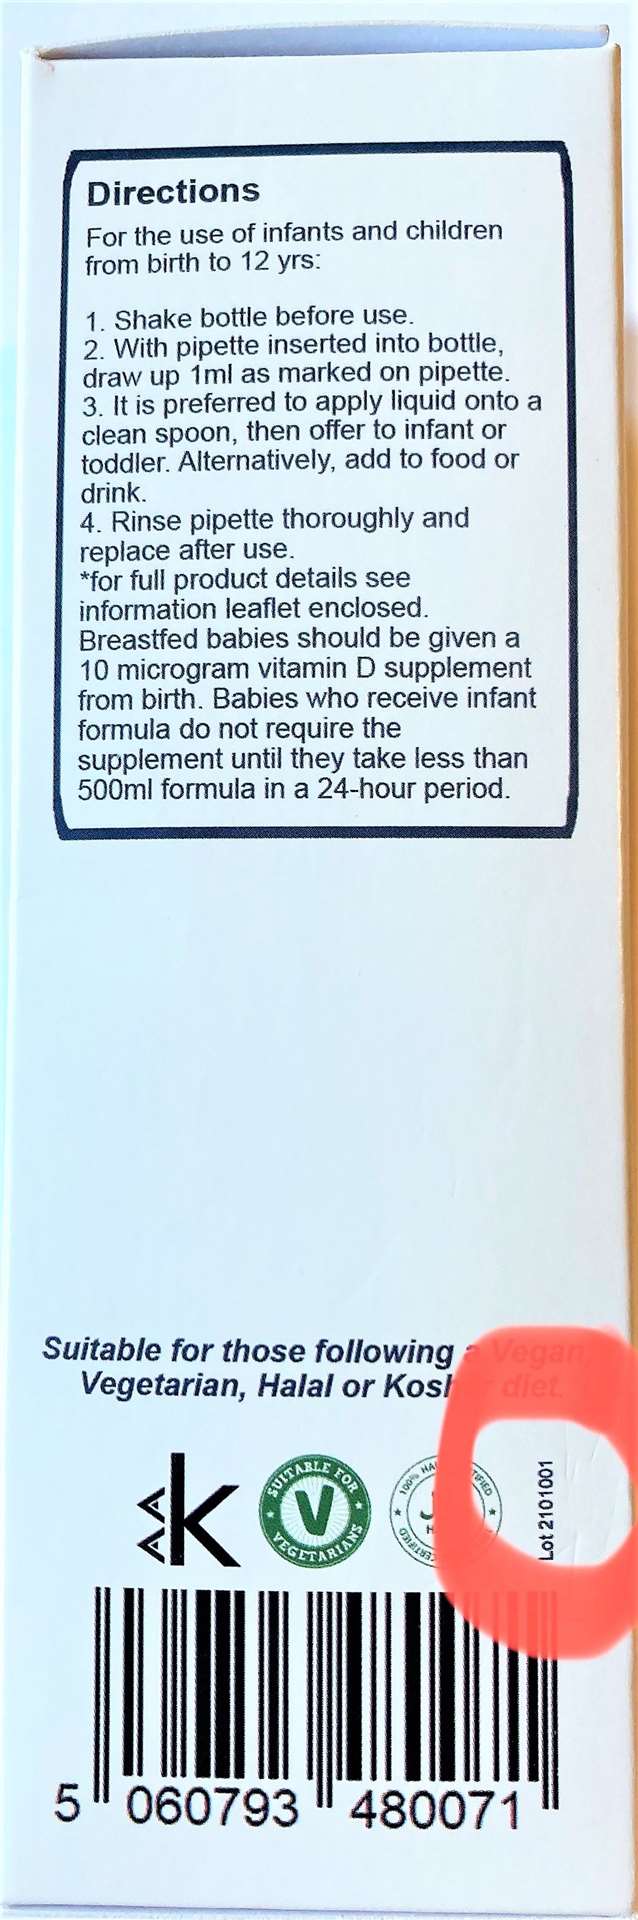 The specific batch of vitamin D drops being recalled is LOT 2101001.